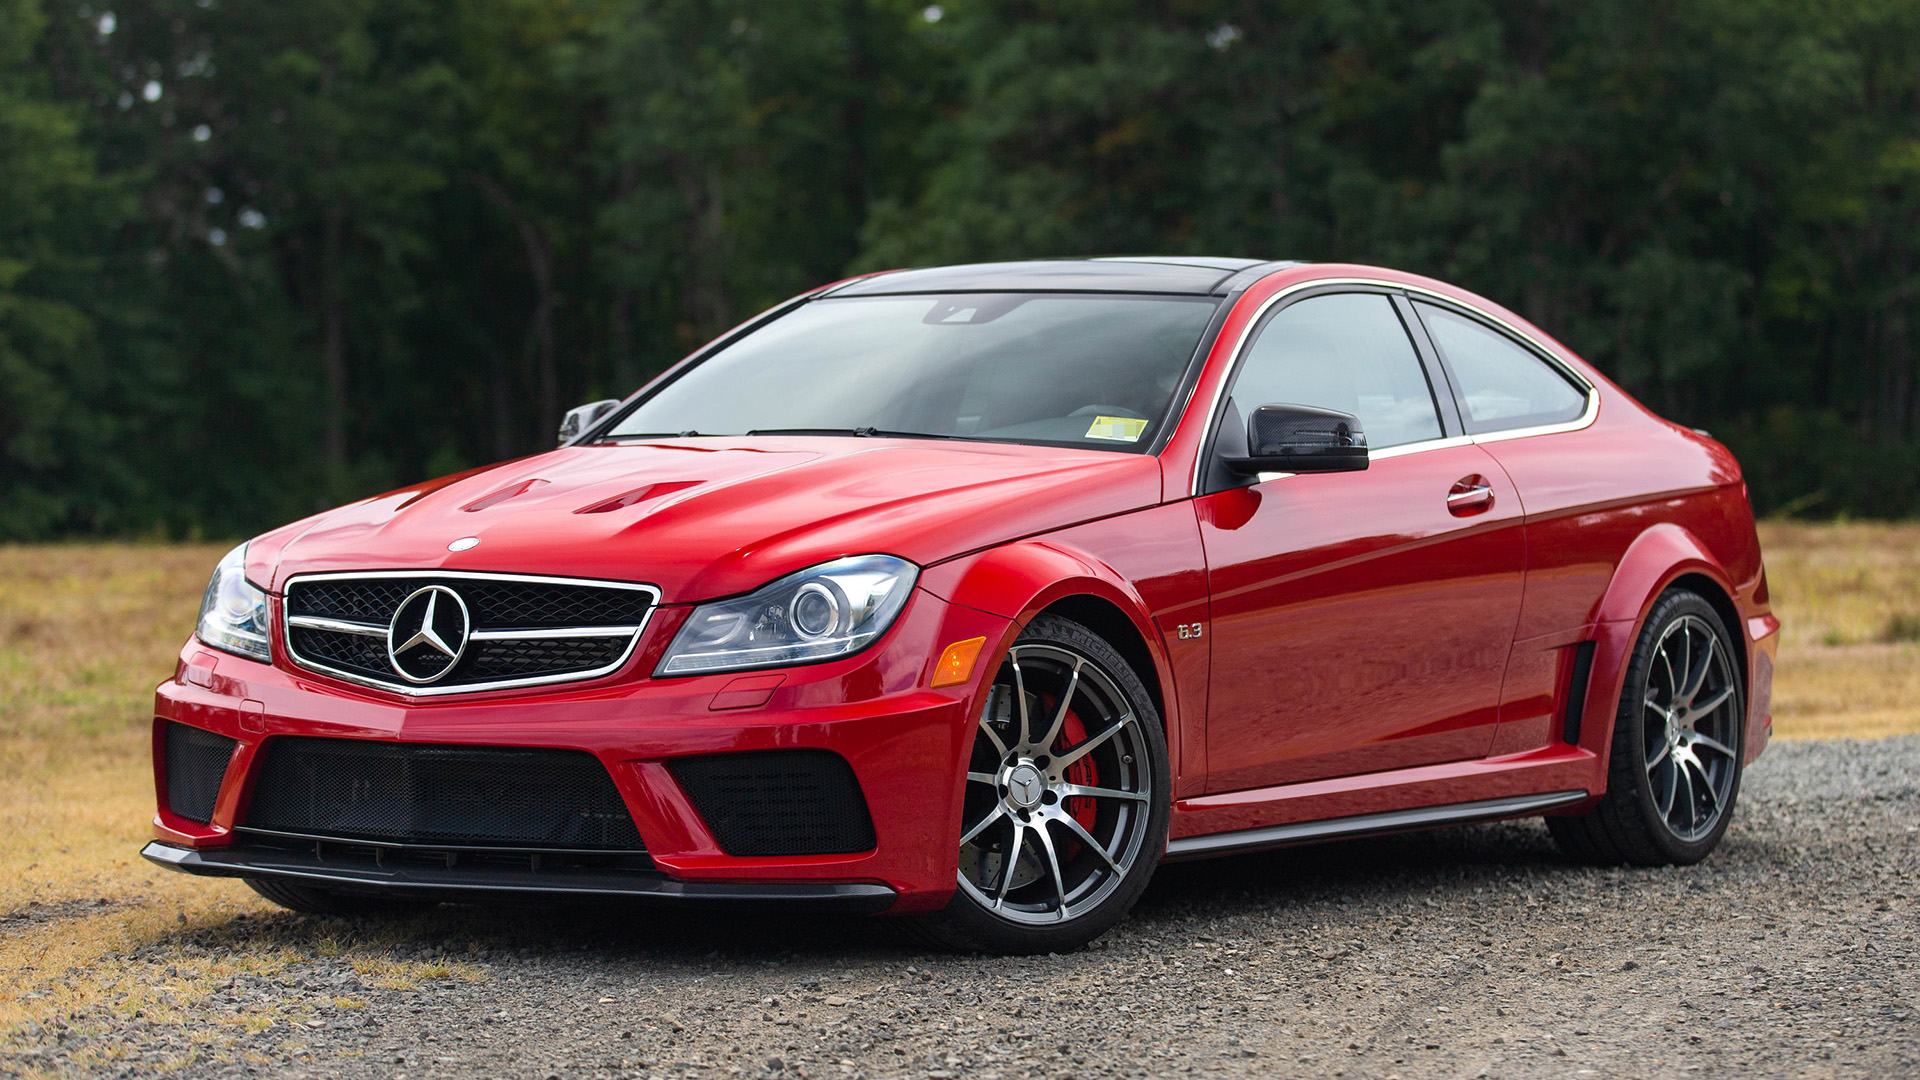 2012 Mercedes-Benz C63 AMG Series A Gloriously Raw to Combustion